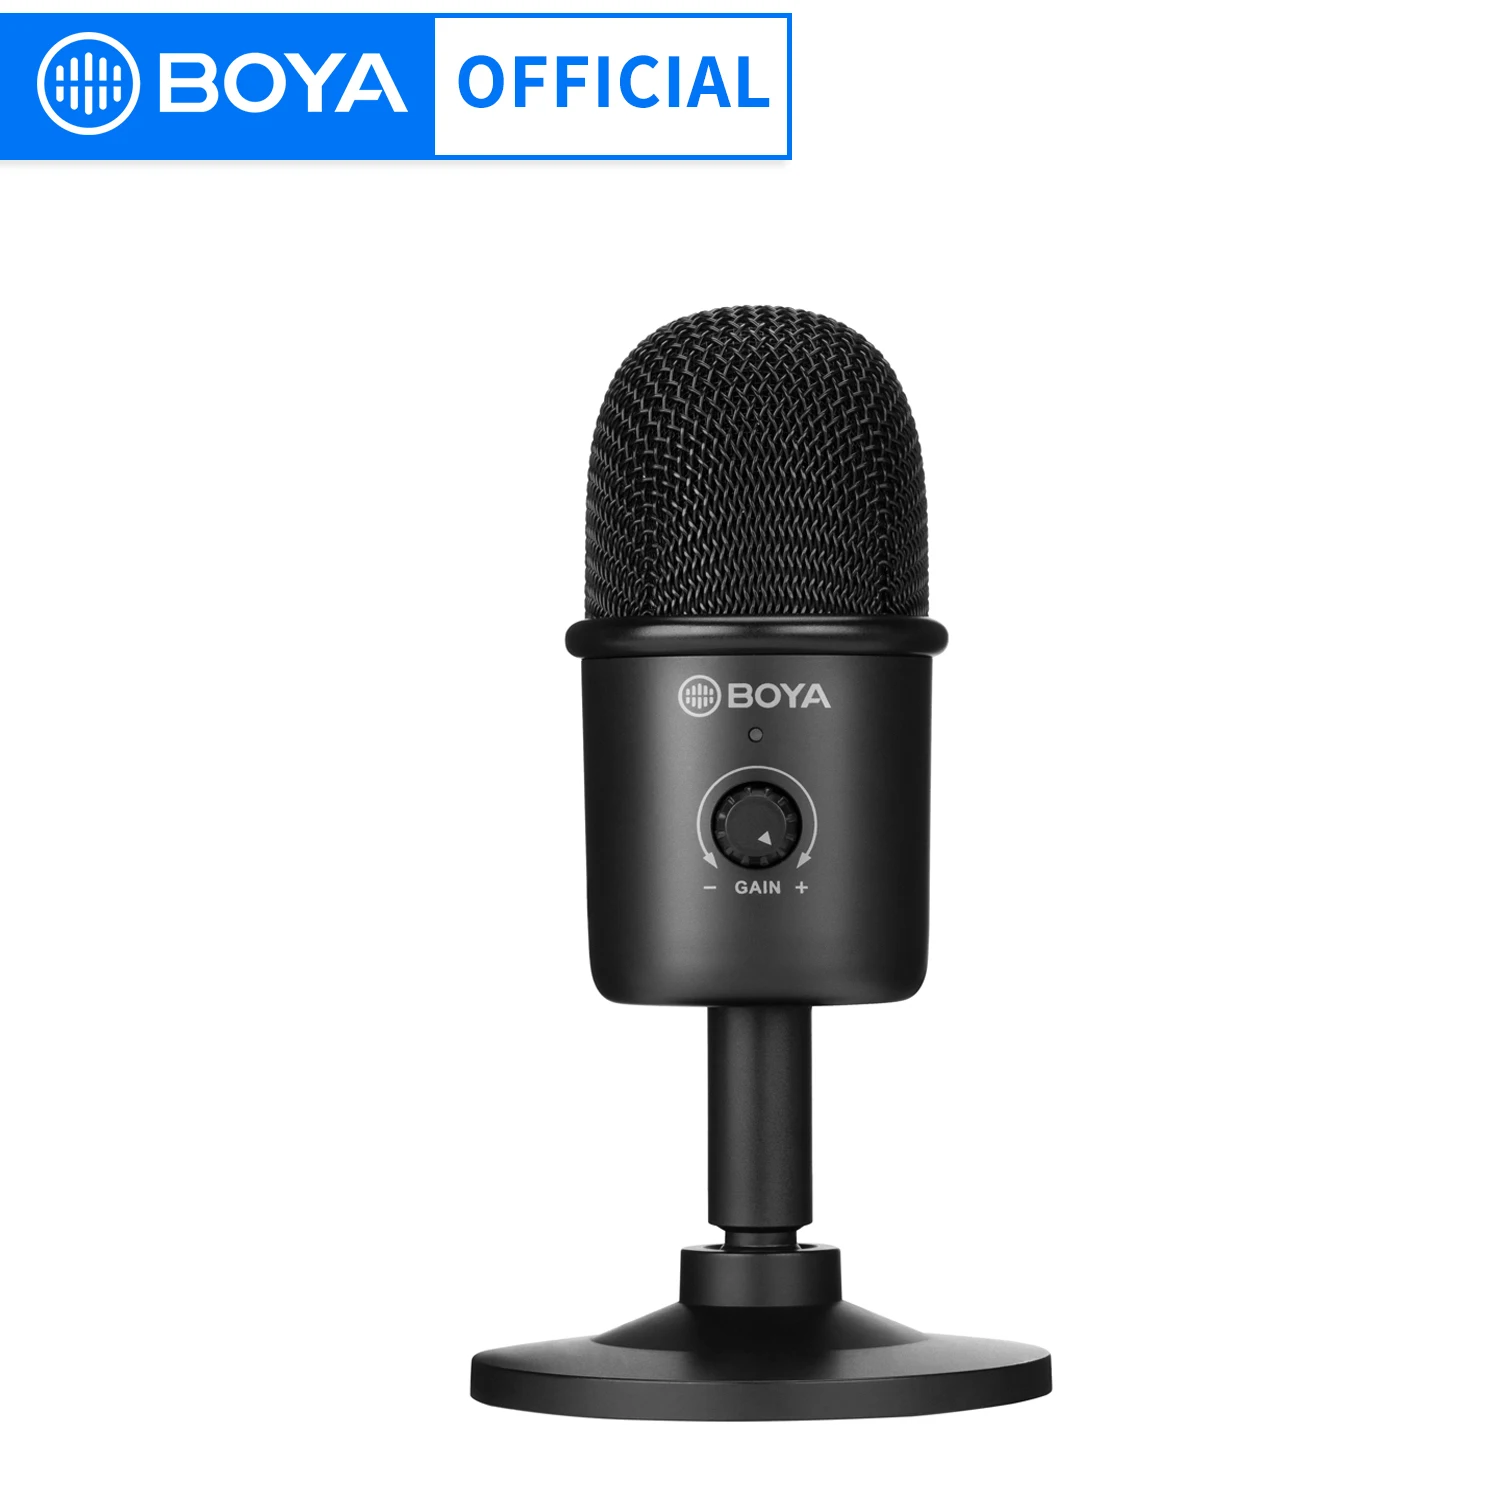 Haomuren Professional USB Condenser Microphone Studio Recording Mic for PC  Computer Phone Gaming Streaming Podcasting K66 - AliExpress